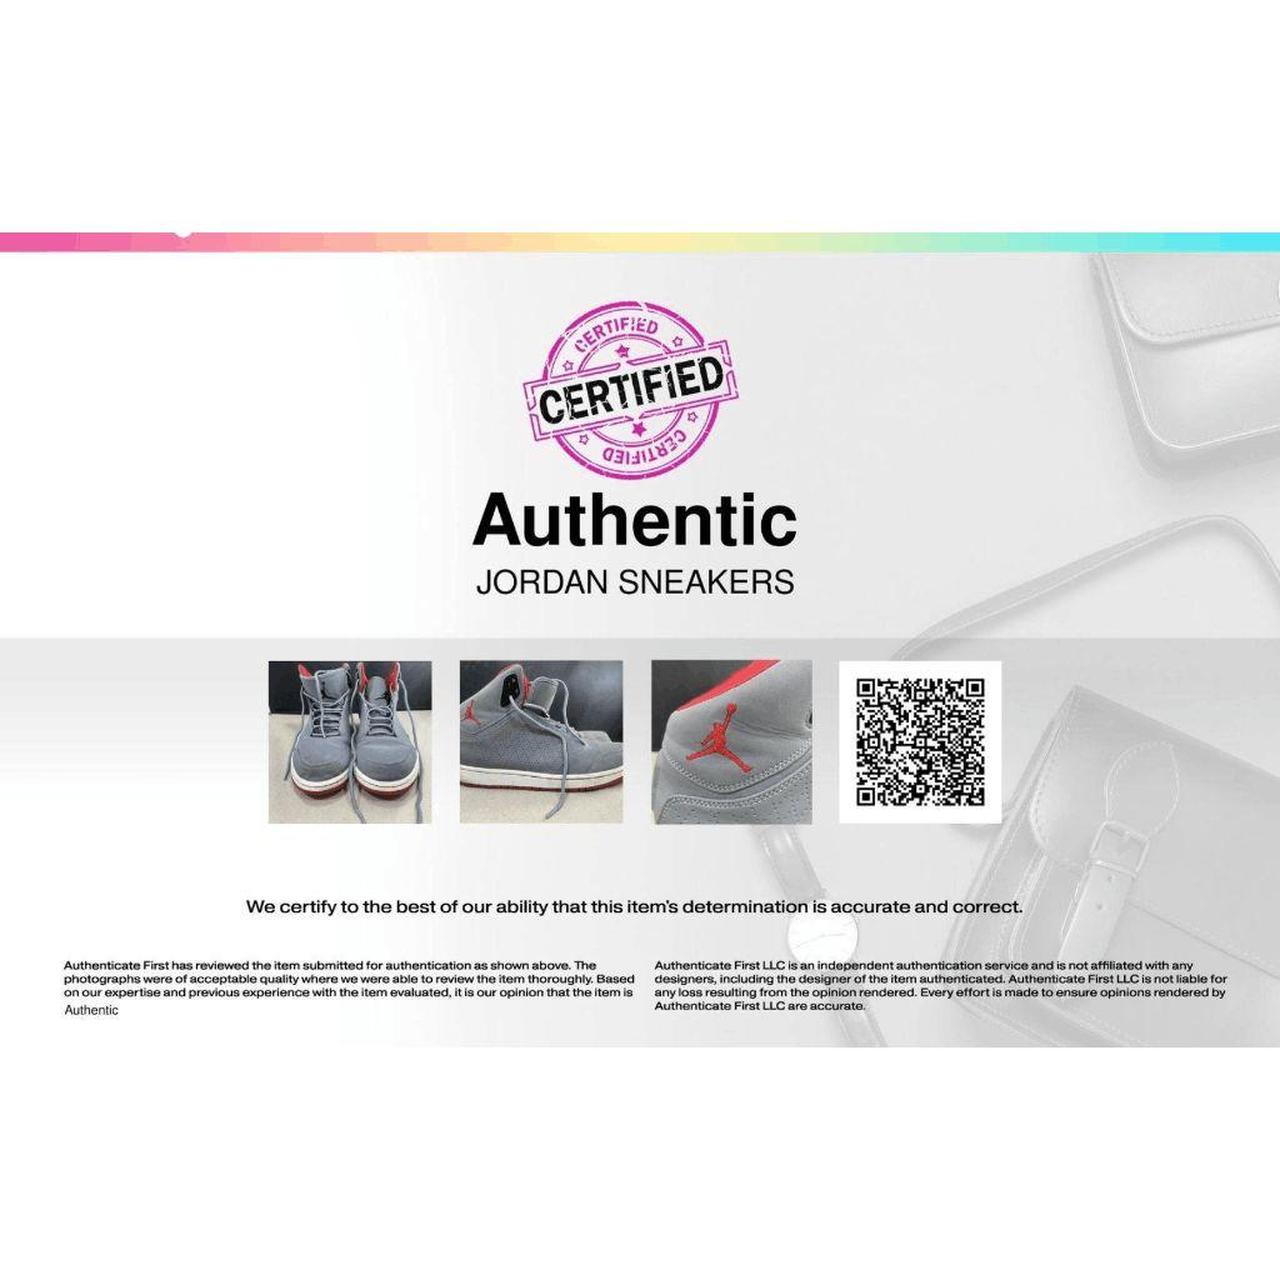 Authenticate First